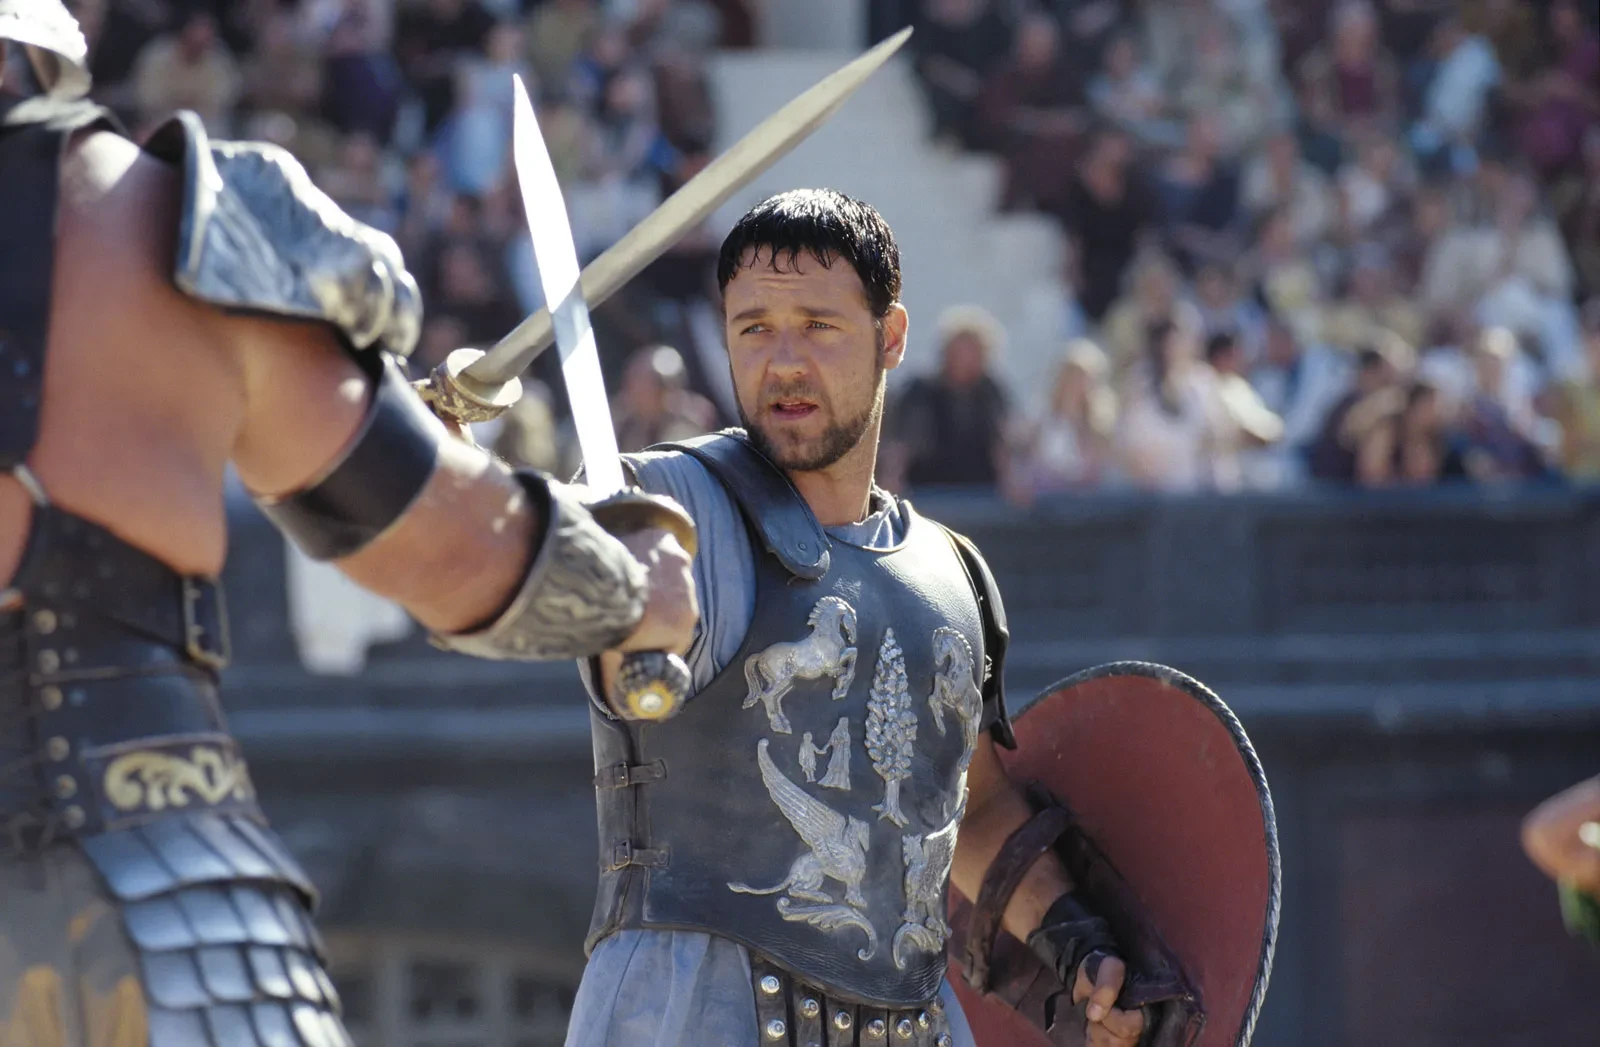 Russell Crowe as Maximus in a still from Gladiator